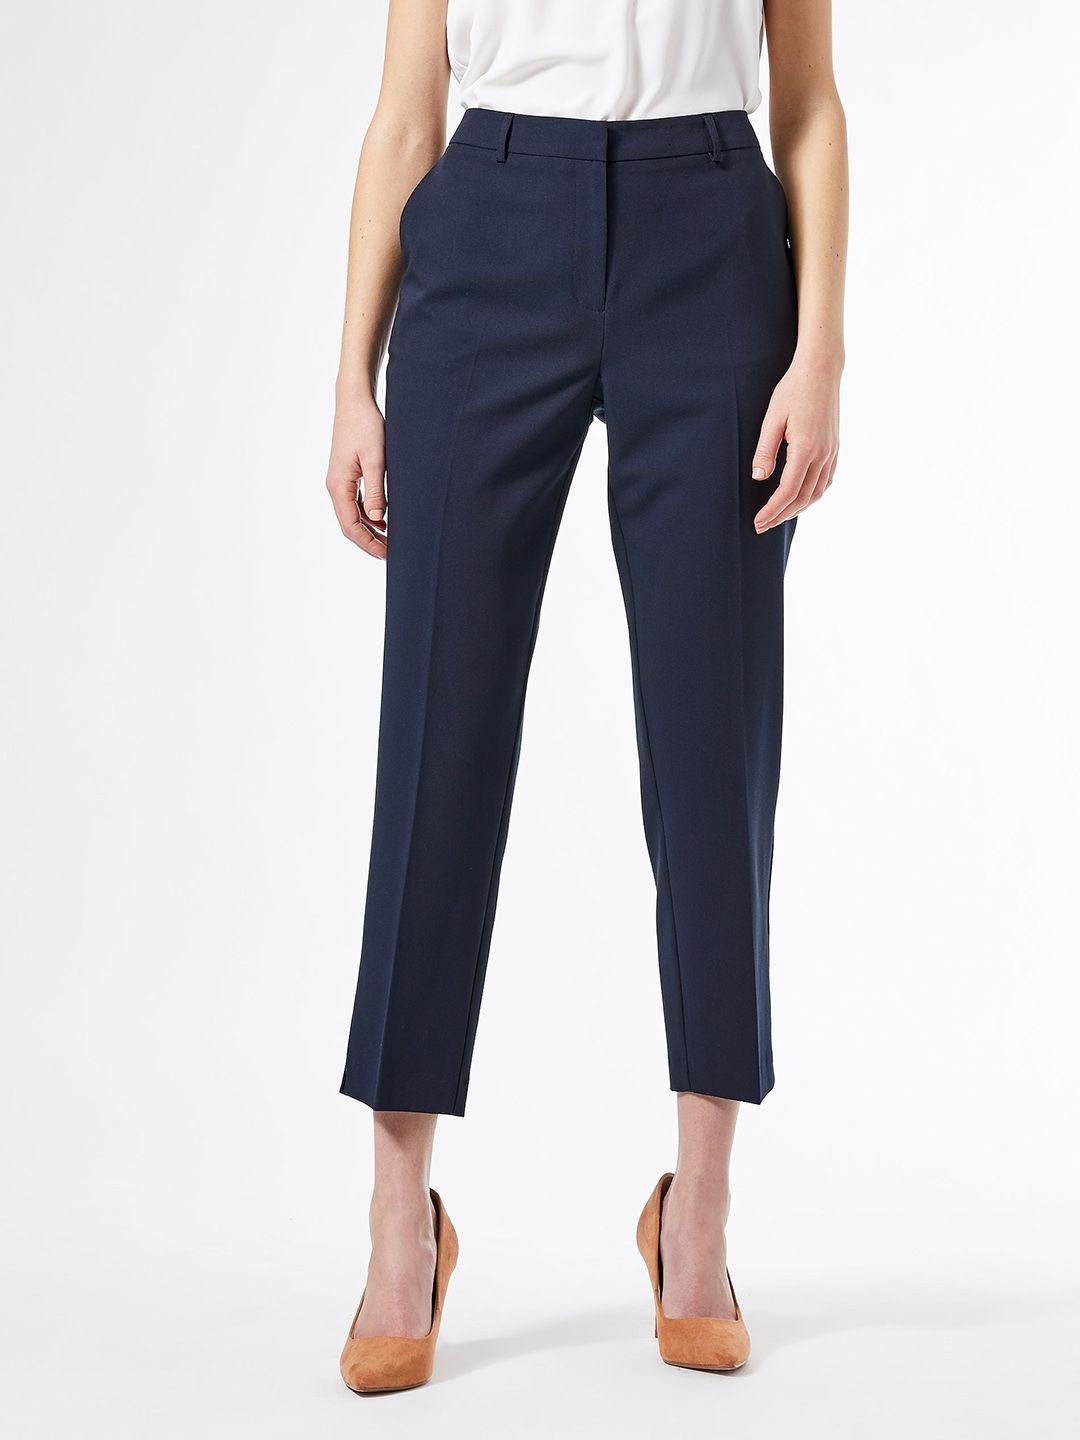 dorothy perkins women navy blue solid cropped formal trousers